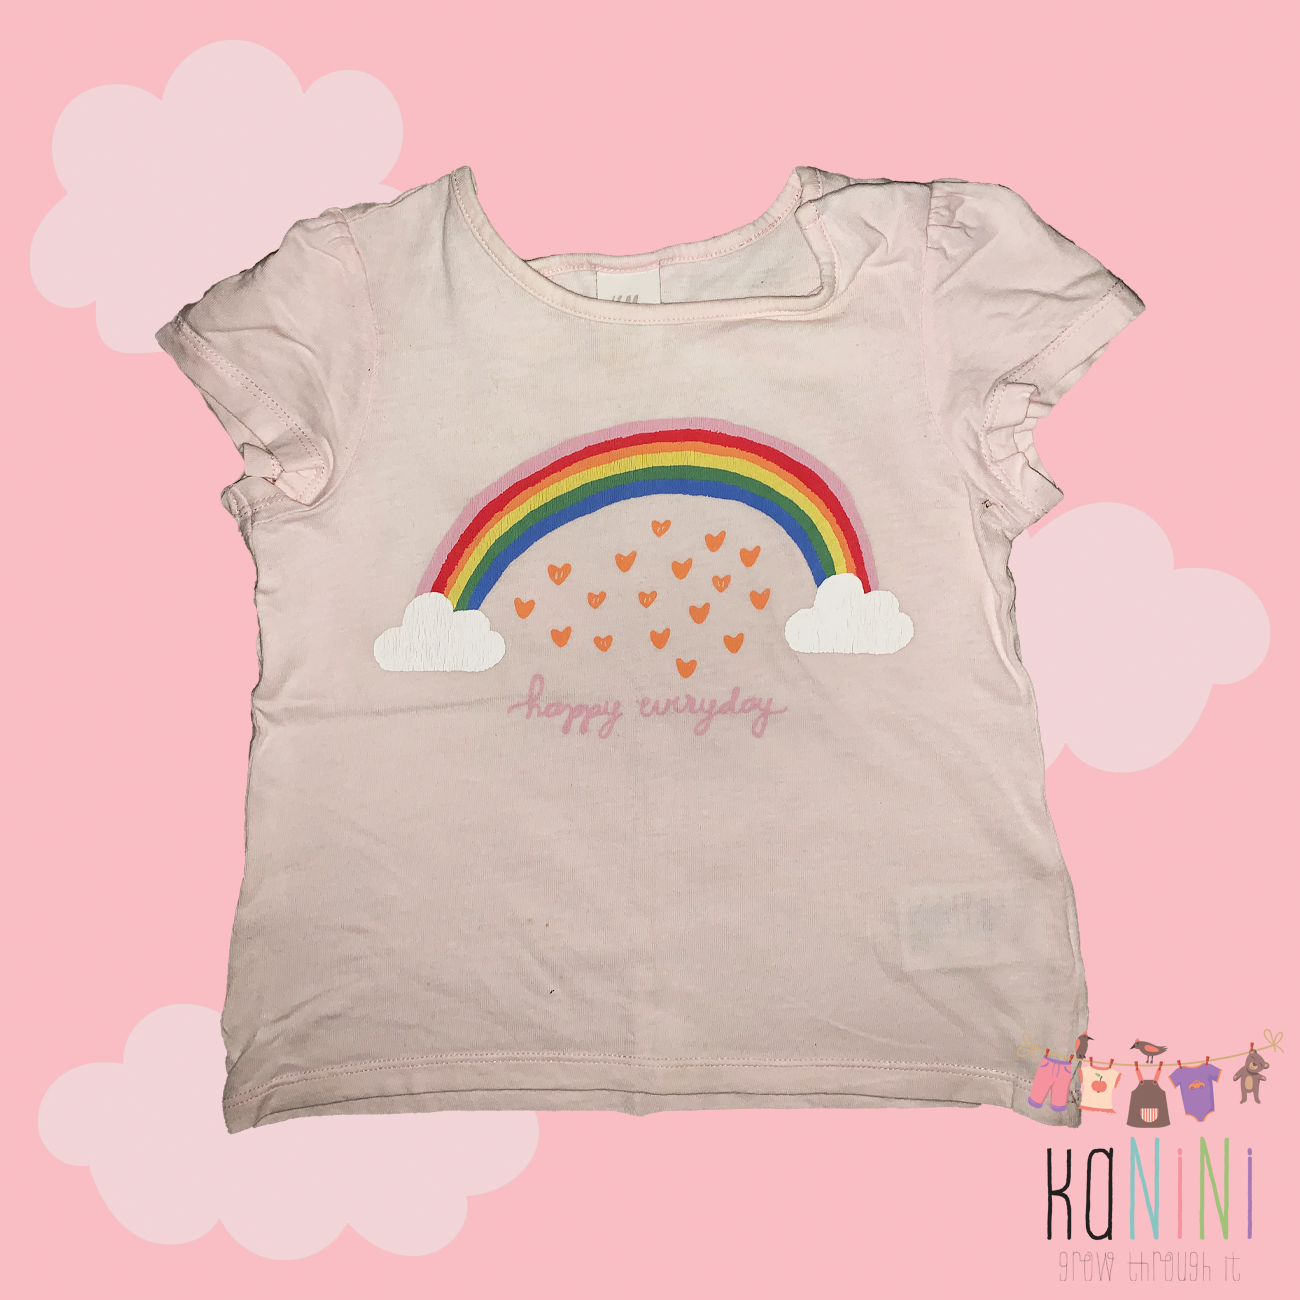 Featured image for “H&M 12 - 18 Months Girls Rainbow Shirt”